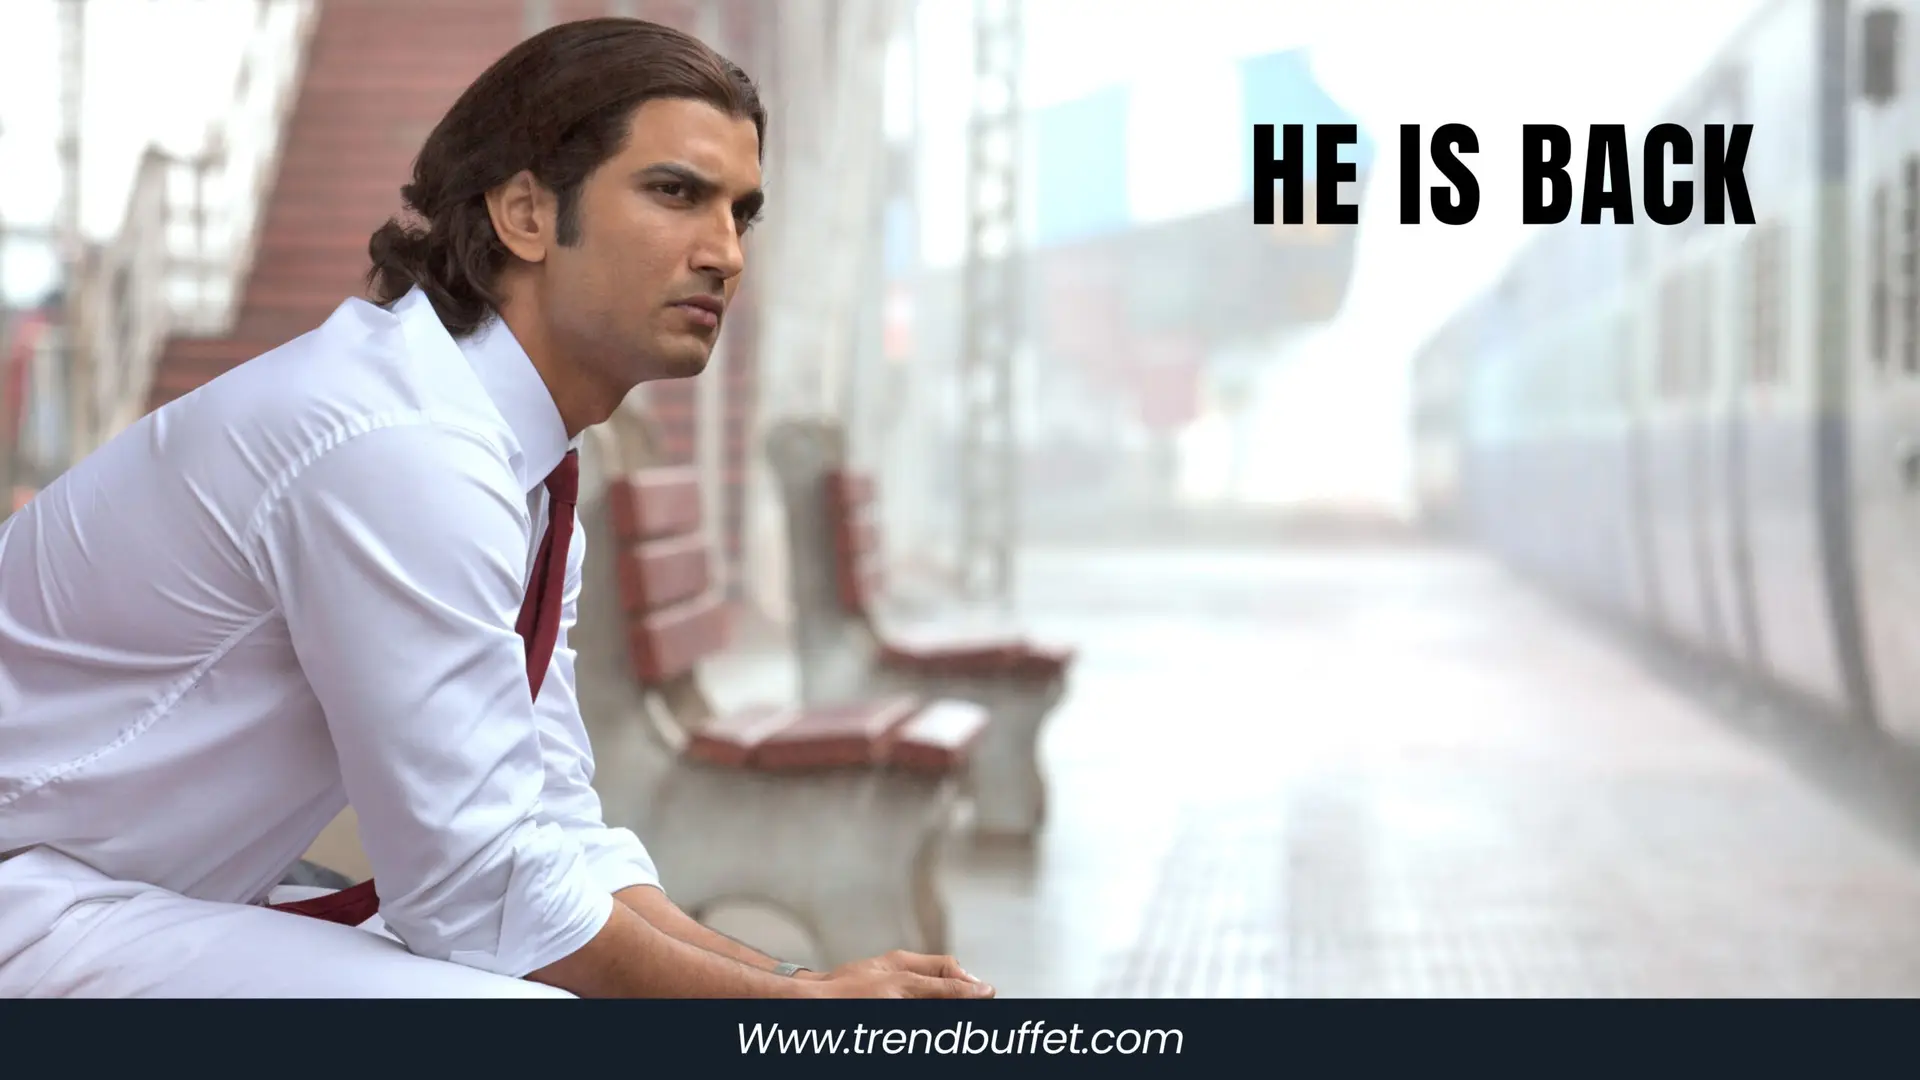 MS Dhoni: The Untold Story Returns to Theaters for Dhoni’s Birthday!